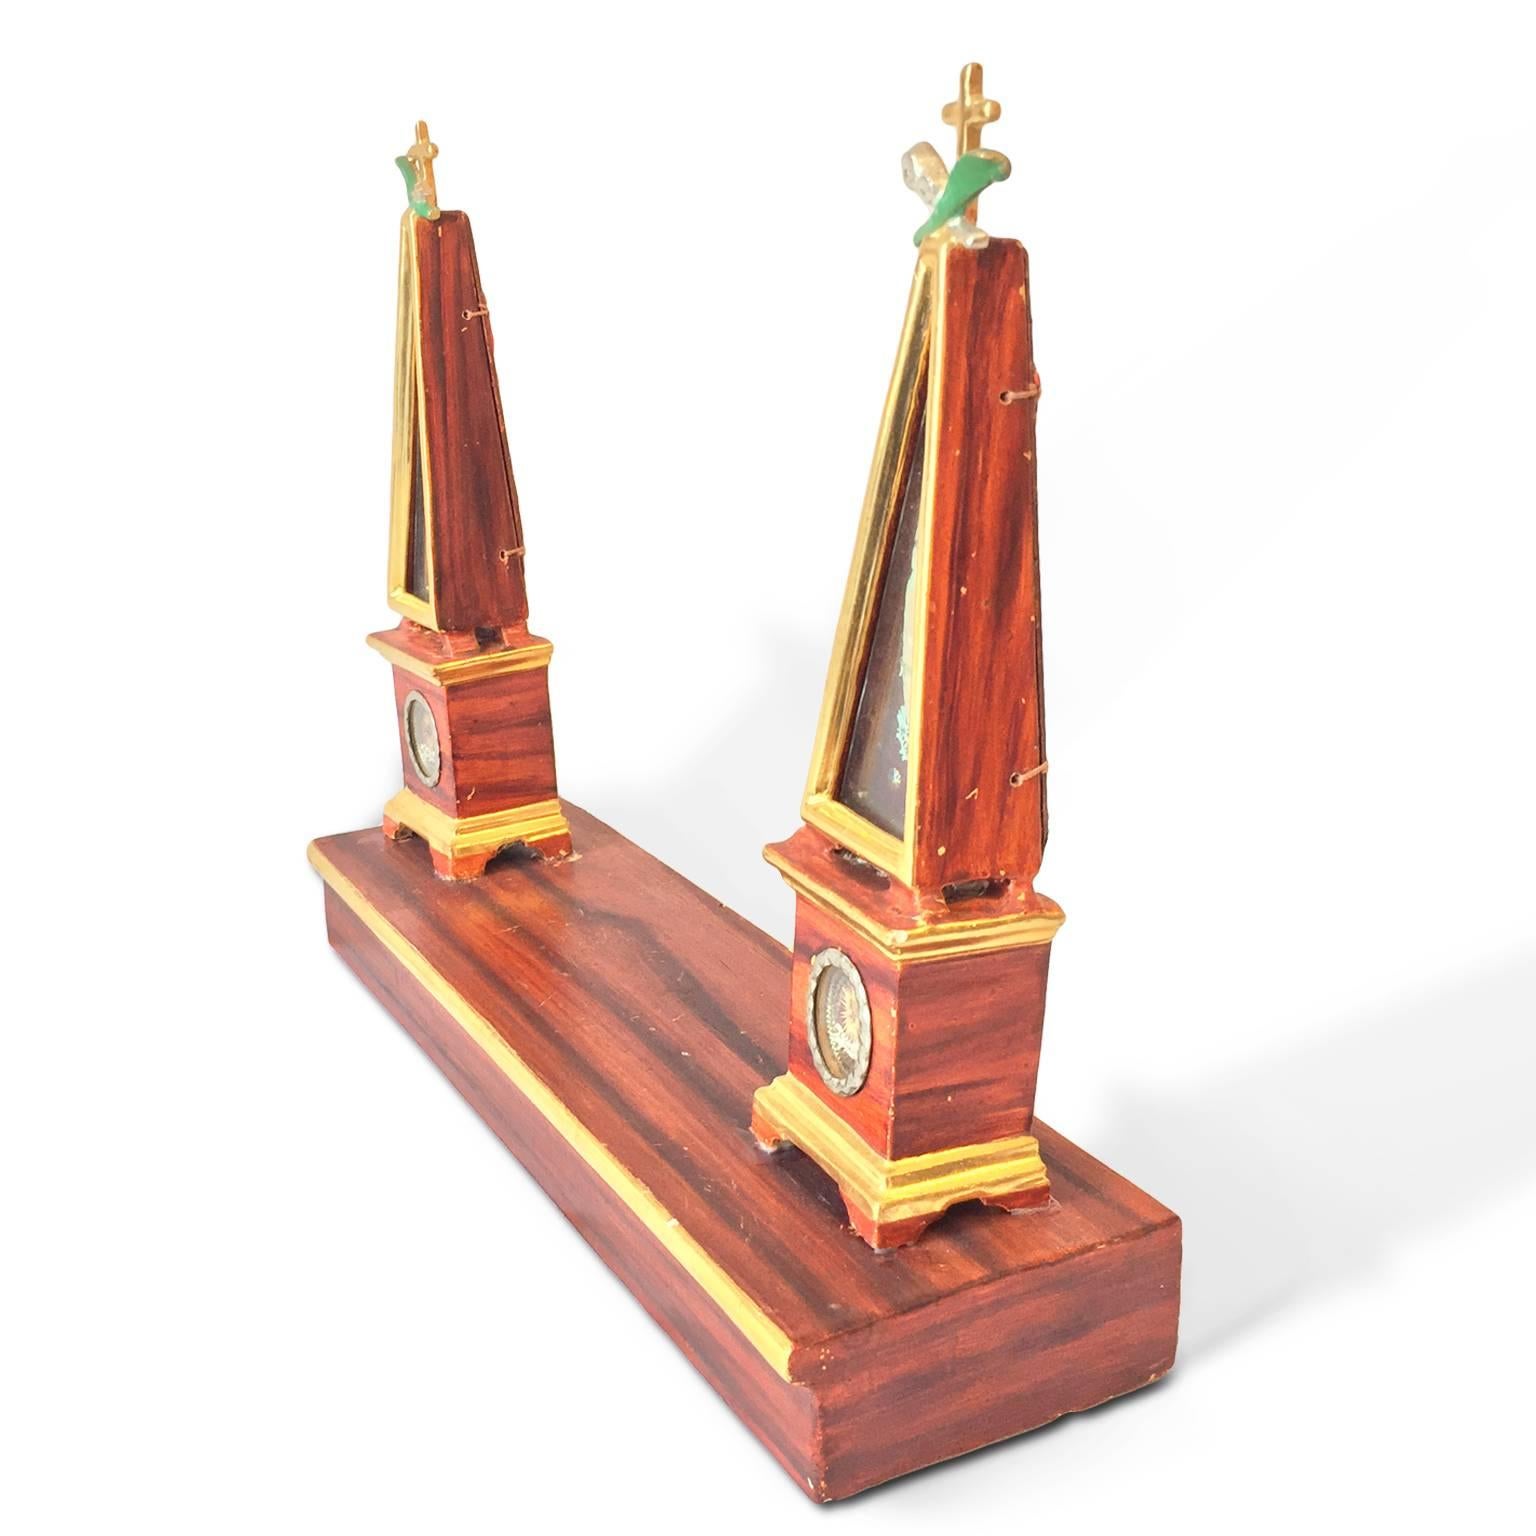 A very rare Italian obelisk-shaped showcase reliquary realized in carved poplar, partially gilded and red painted, resting on a rectangular base; the back side is not decorated and shows wax seals. This unique artwork of Tuscan origin dates back to